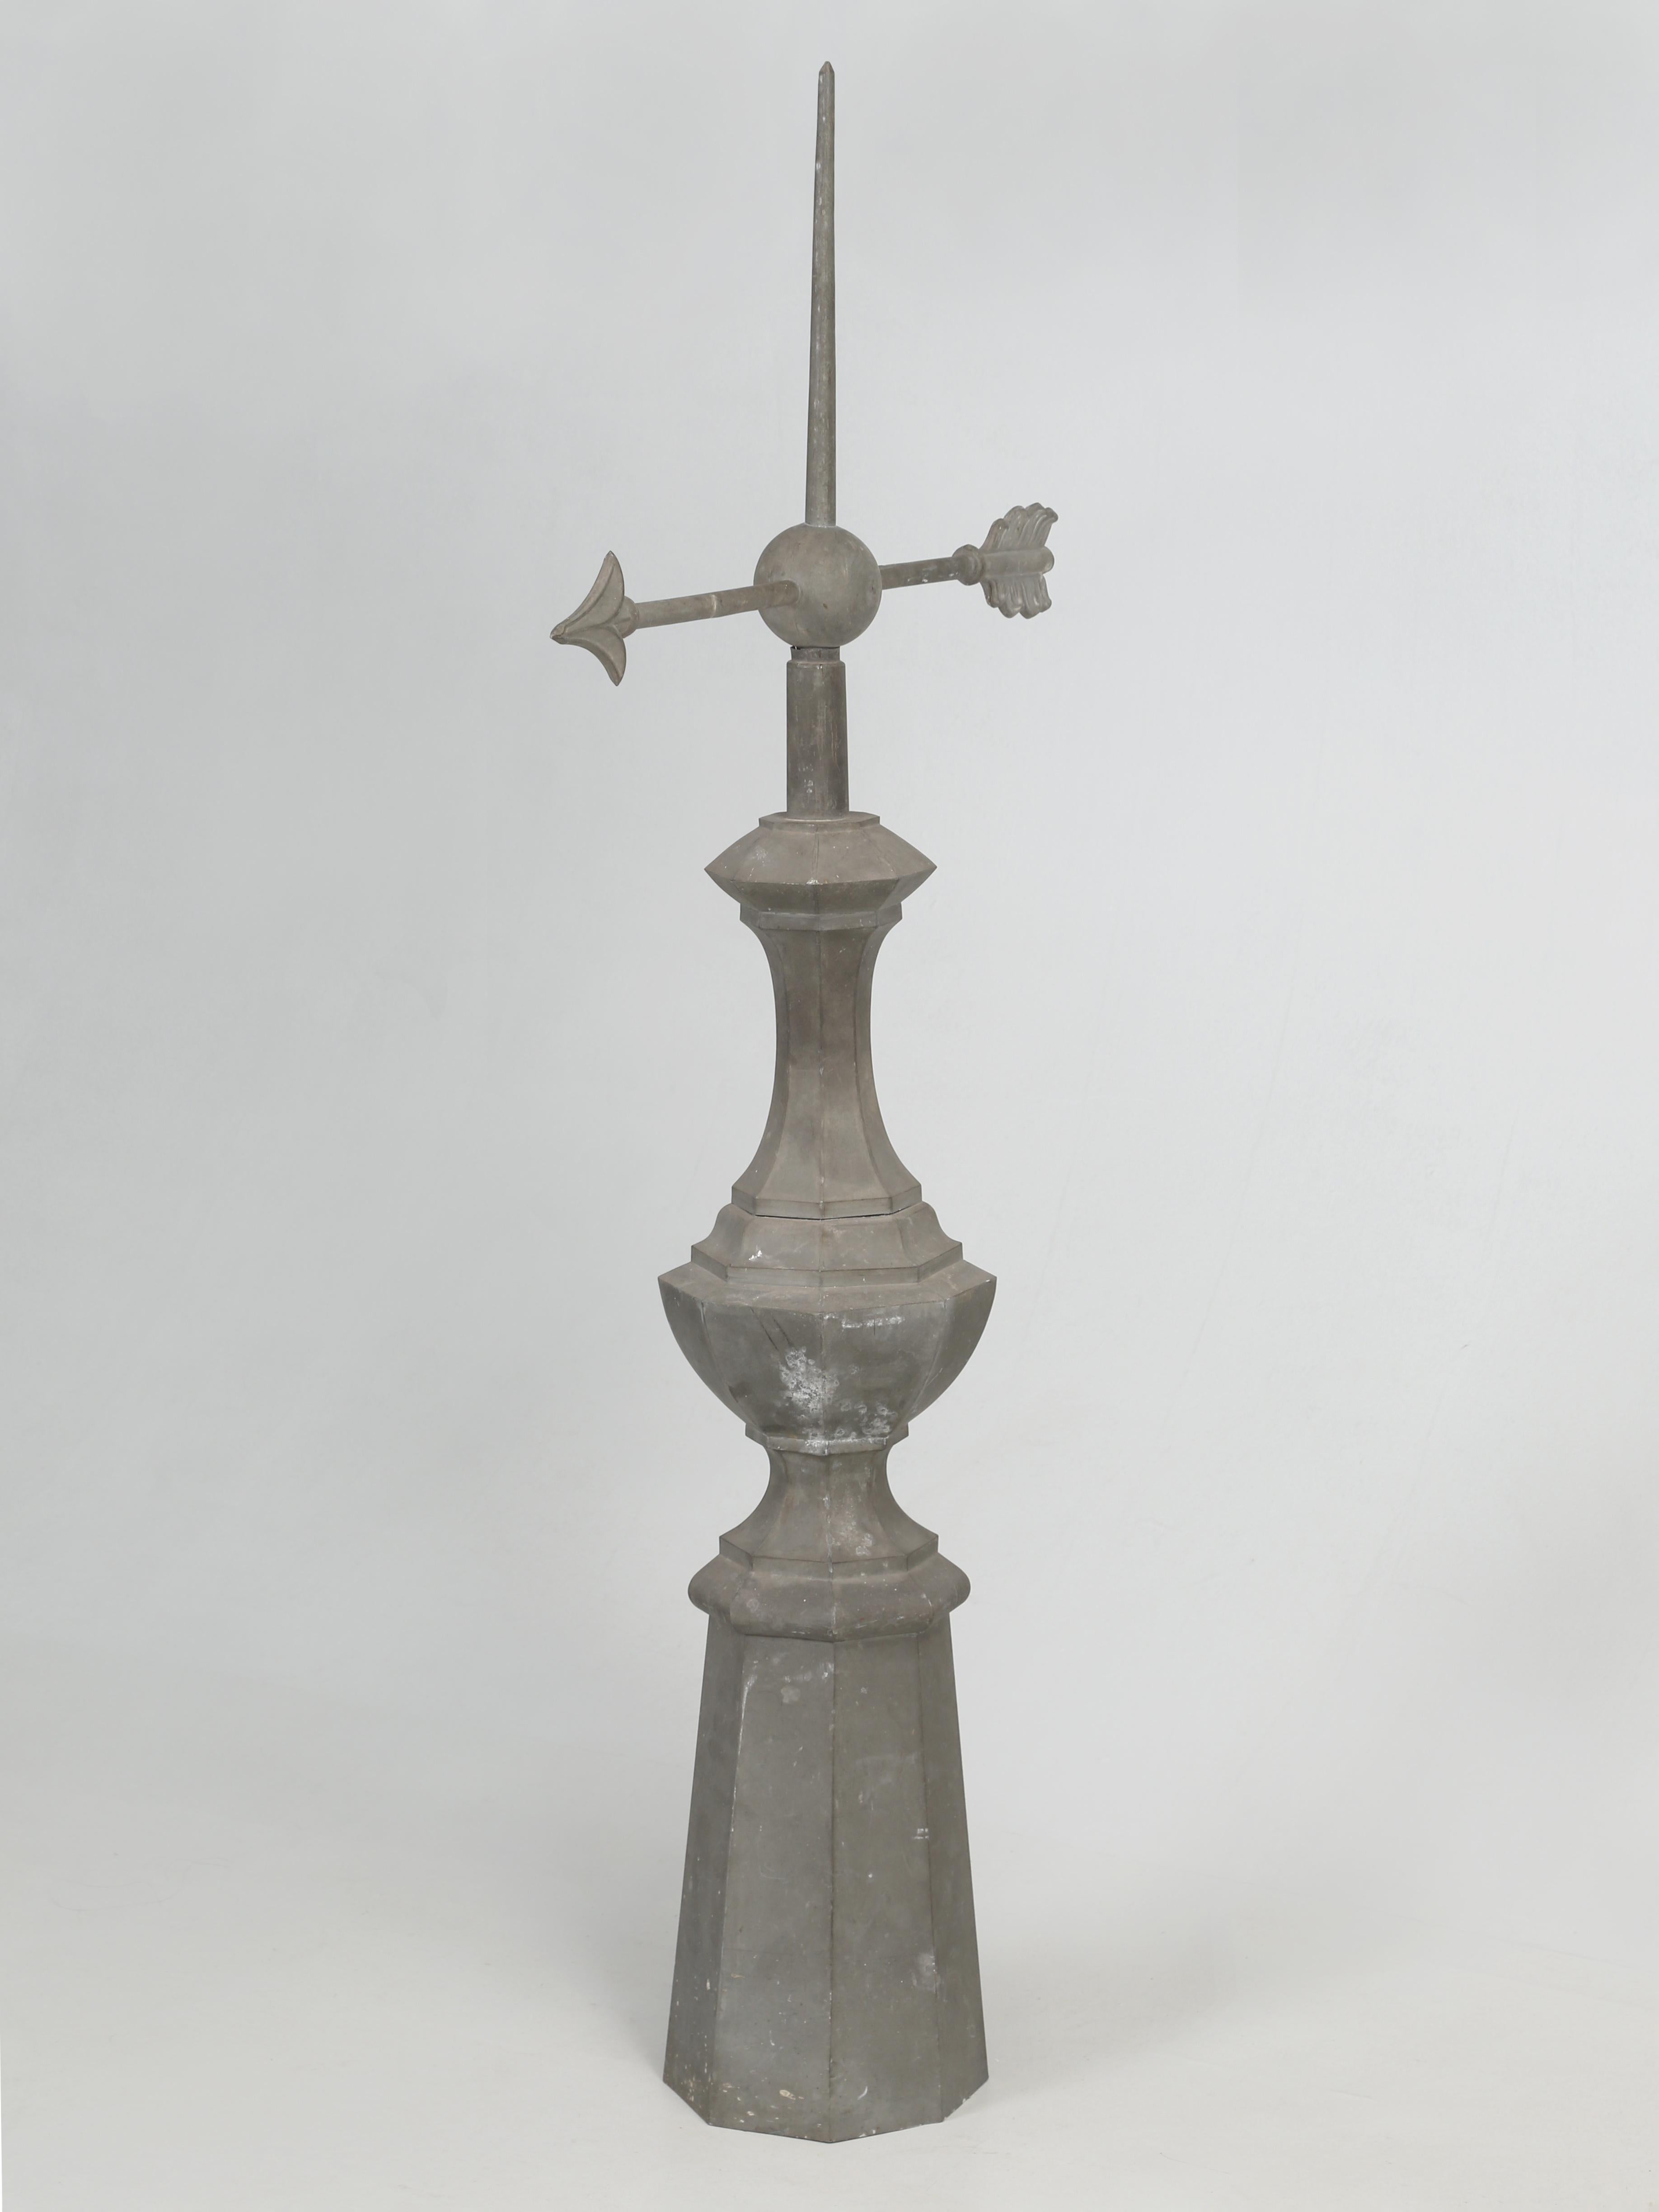 Antique zinc weathervane that we believe probably came from France and was constructed around the turn of the century and by that we mean circa 1900. Completely original and unrestored and the weathervane does not show any signs of prior repairs.